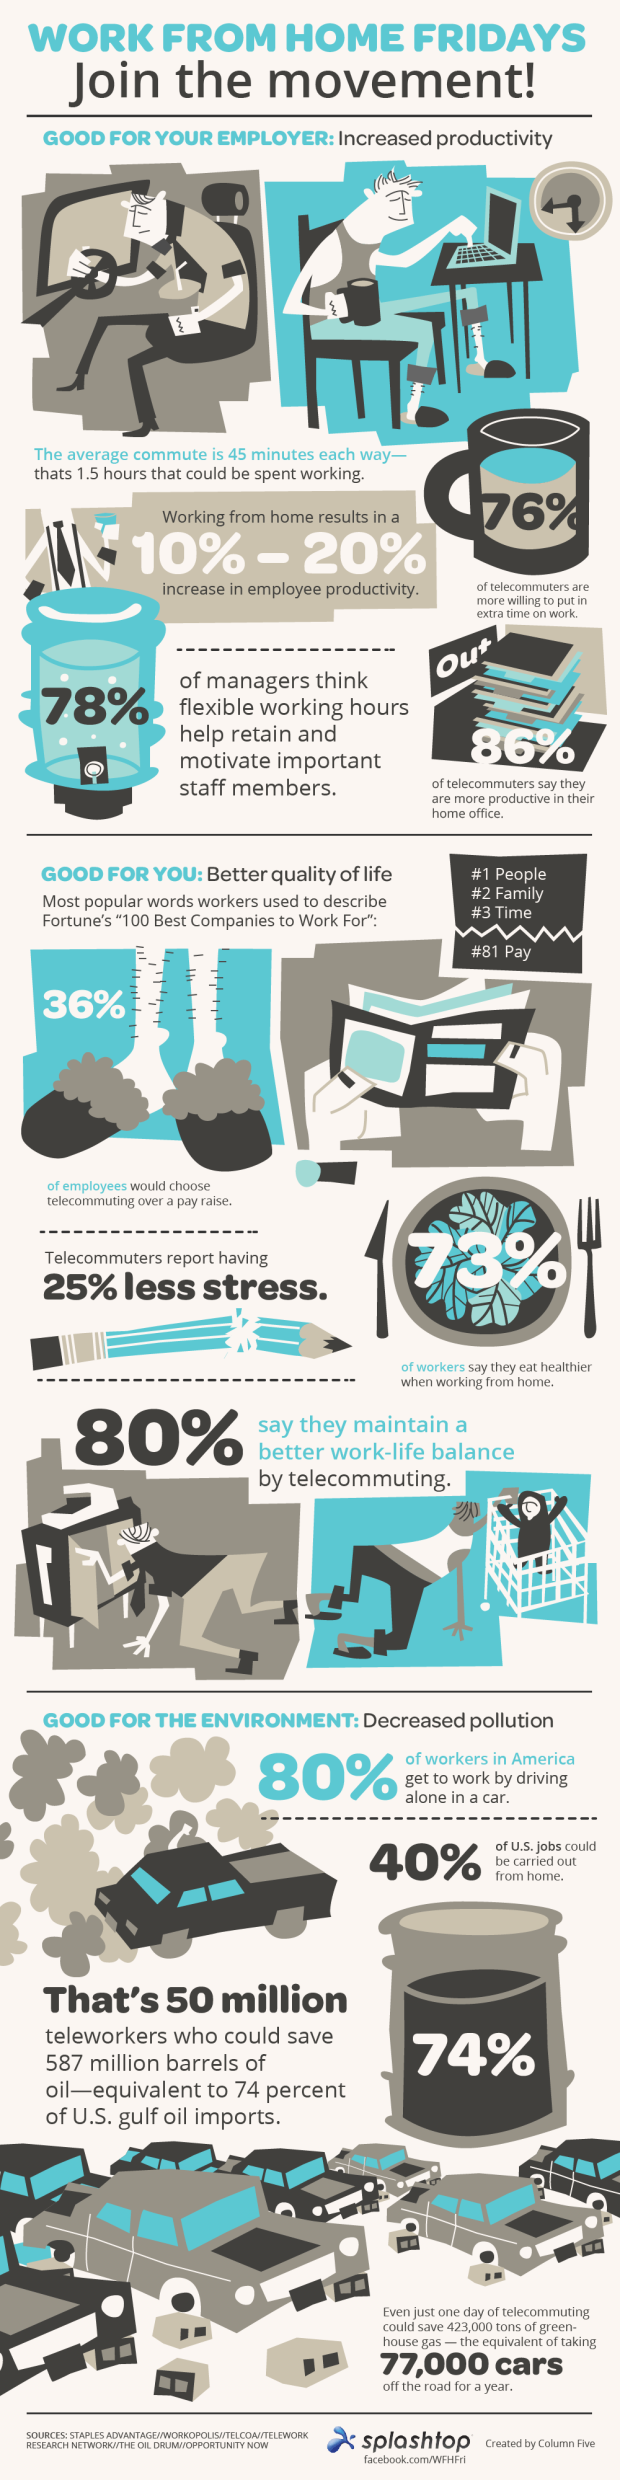 Work from home infographic benefits